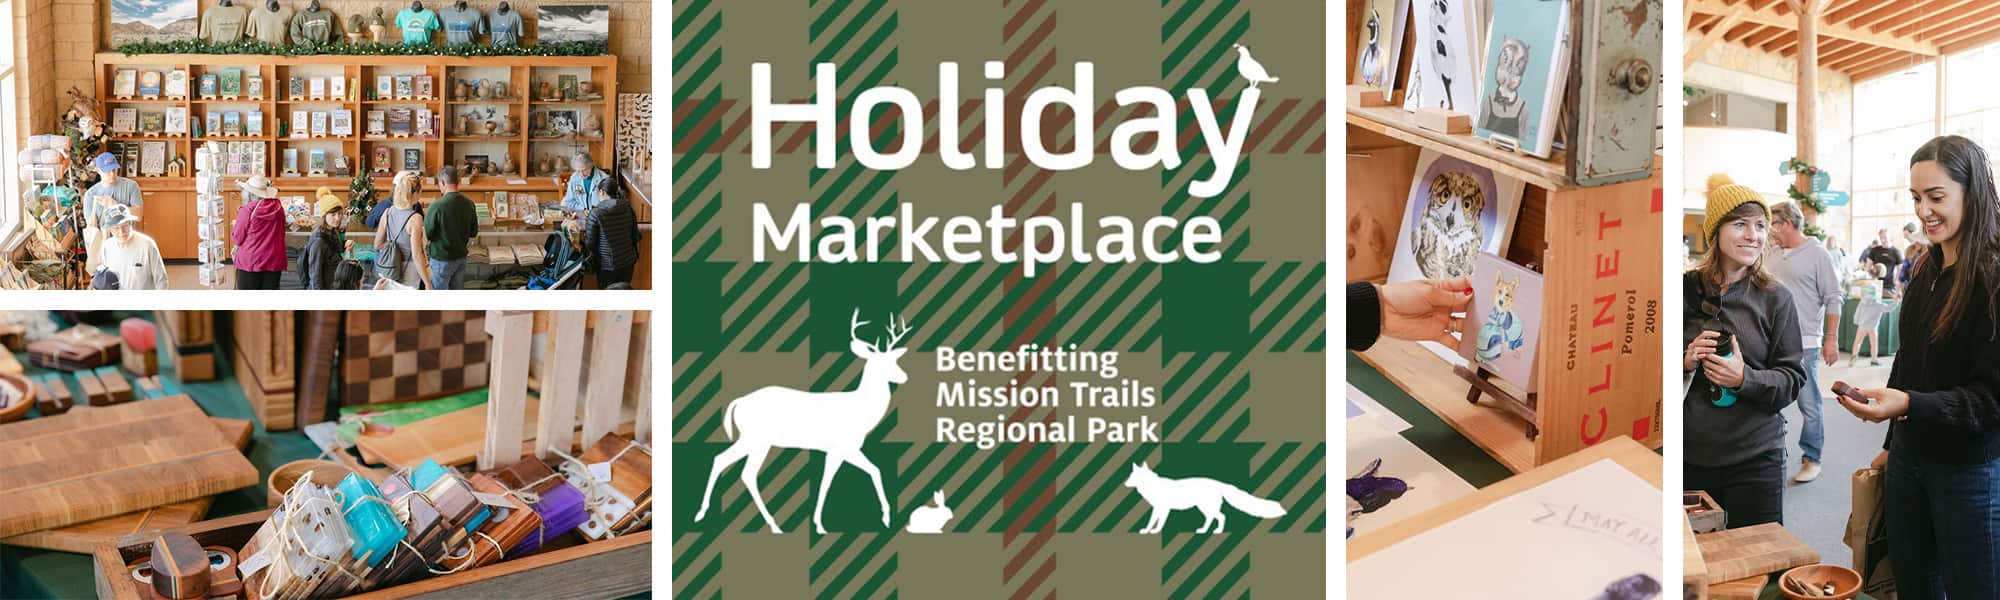 Holiday Marketplace to benefit Mission Trails Regional Park